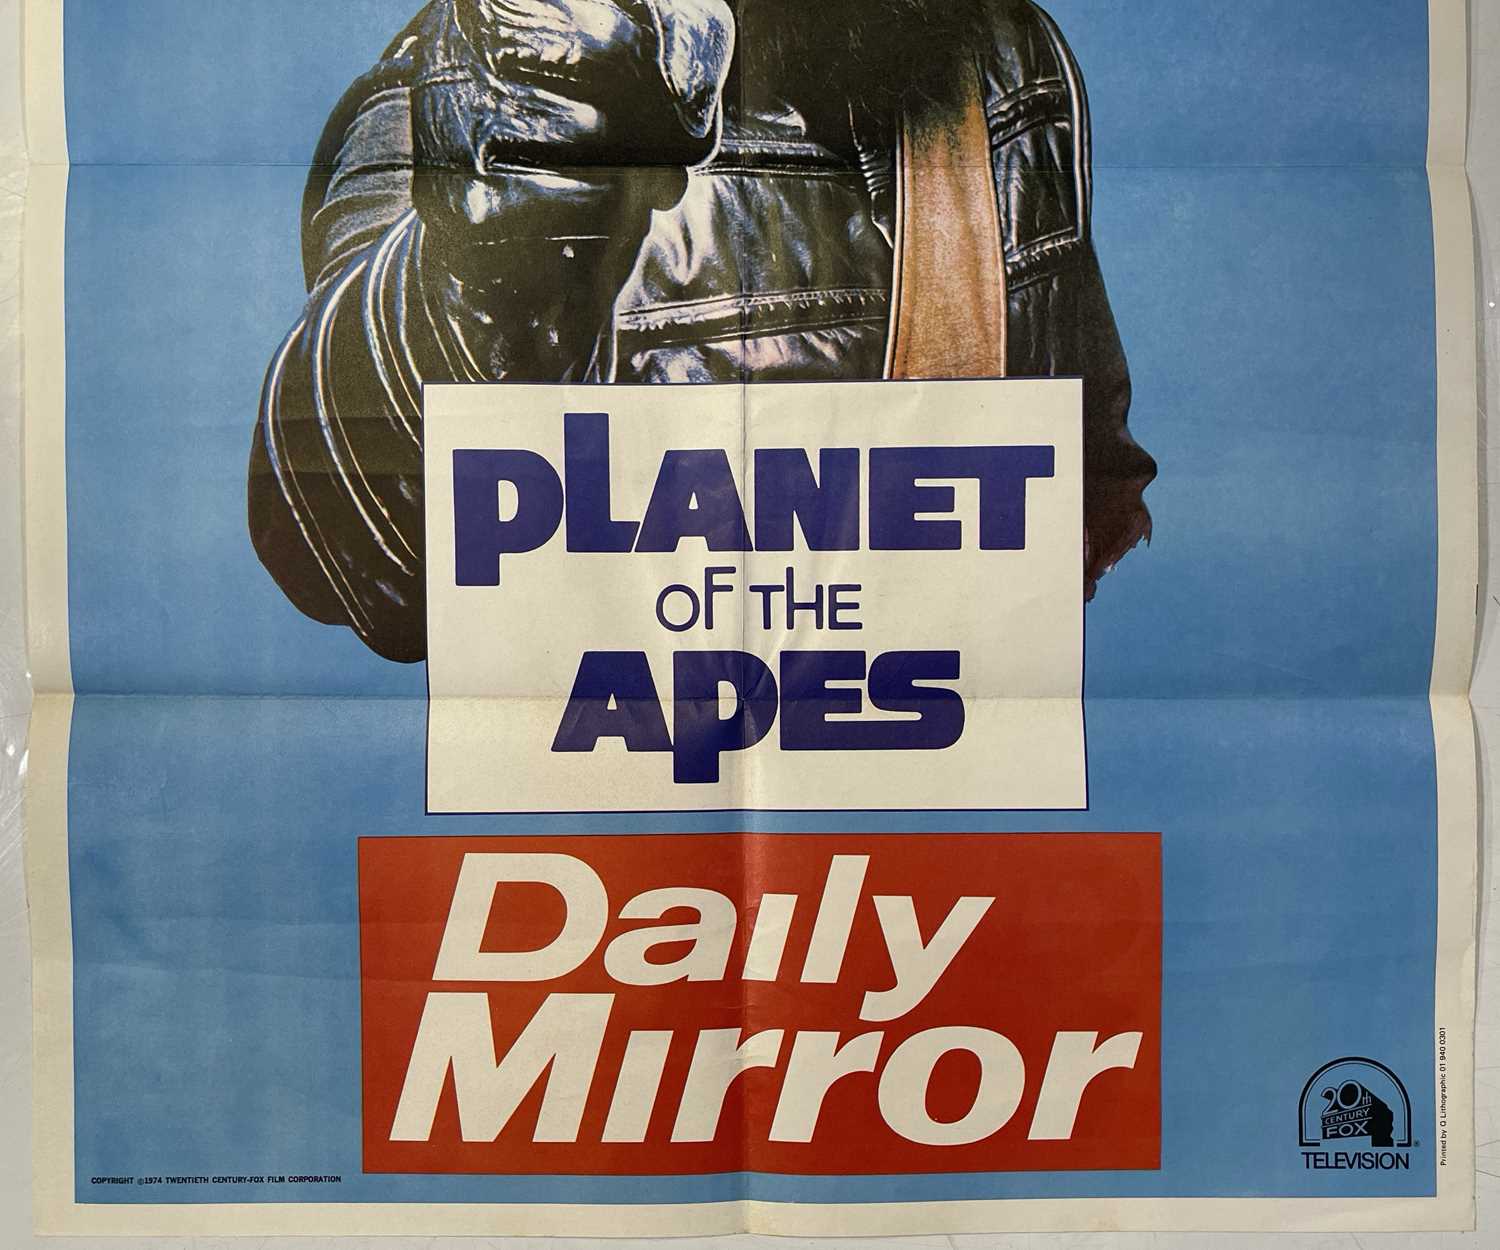 PLANET OF THE APES (1974) GO APE! DAILY MIRROR PROMO POSTER. - Image 2 of 4